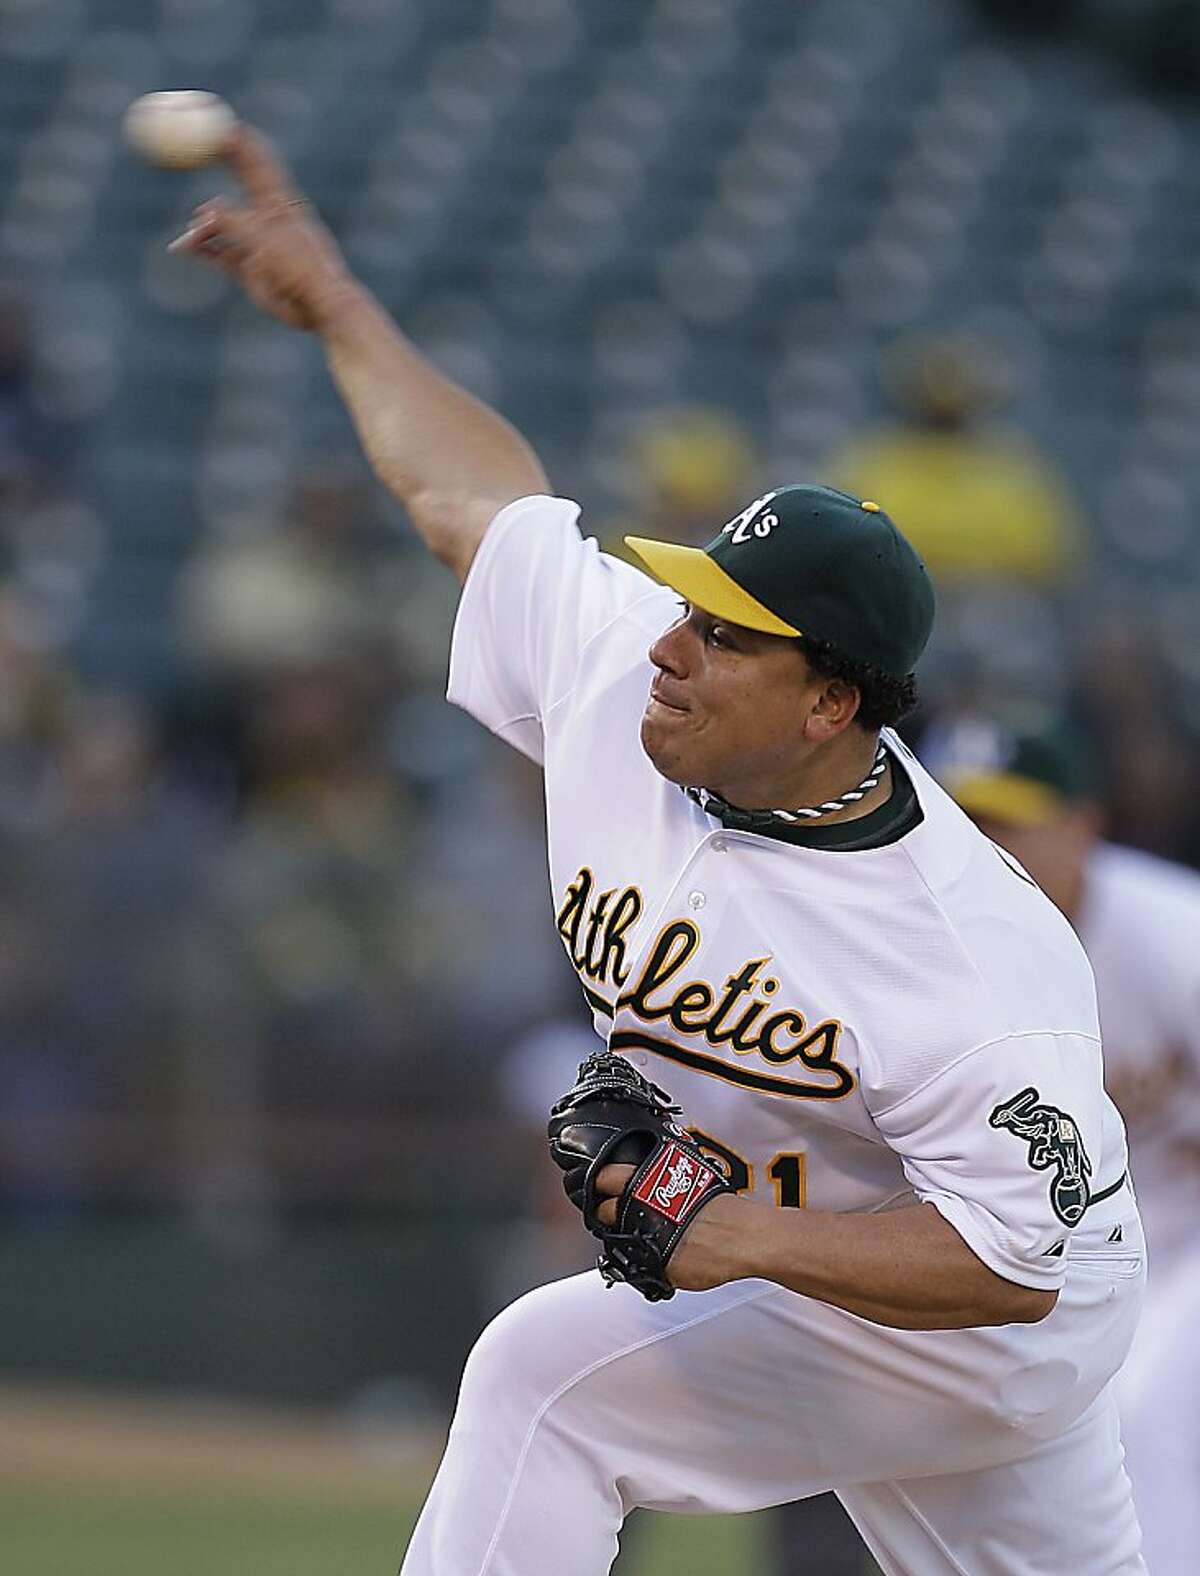 Oakland Athletics' Bartolo Colon works against the Texas Rangers in the first inning of a baseball game on Wednesday, June 6, 2012, in Oakland, Calif. (AP Photo/Ben Margot)